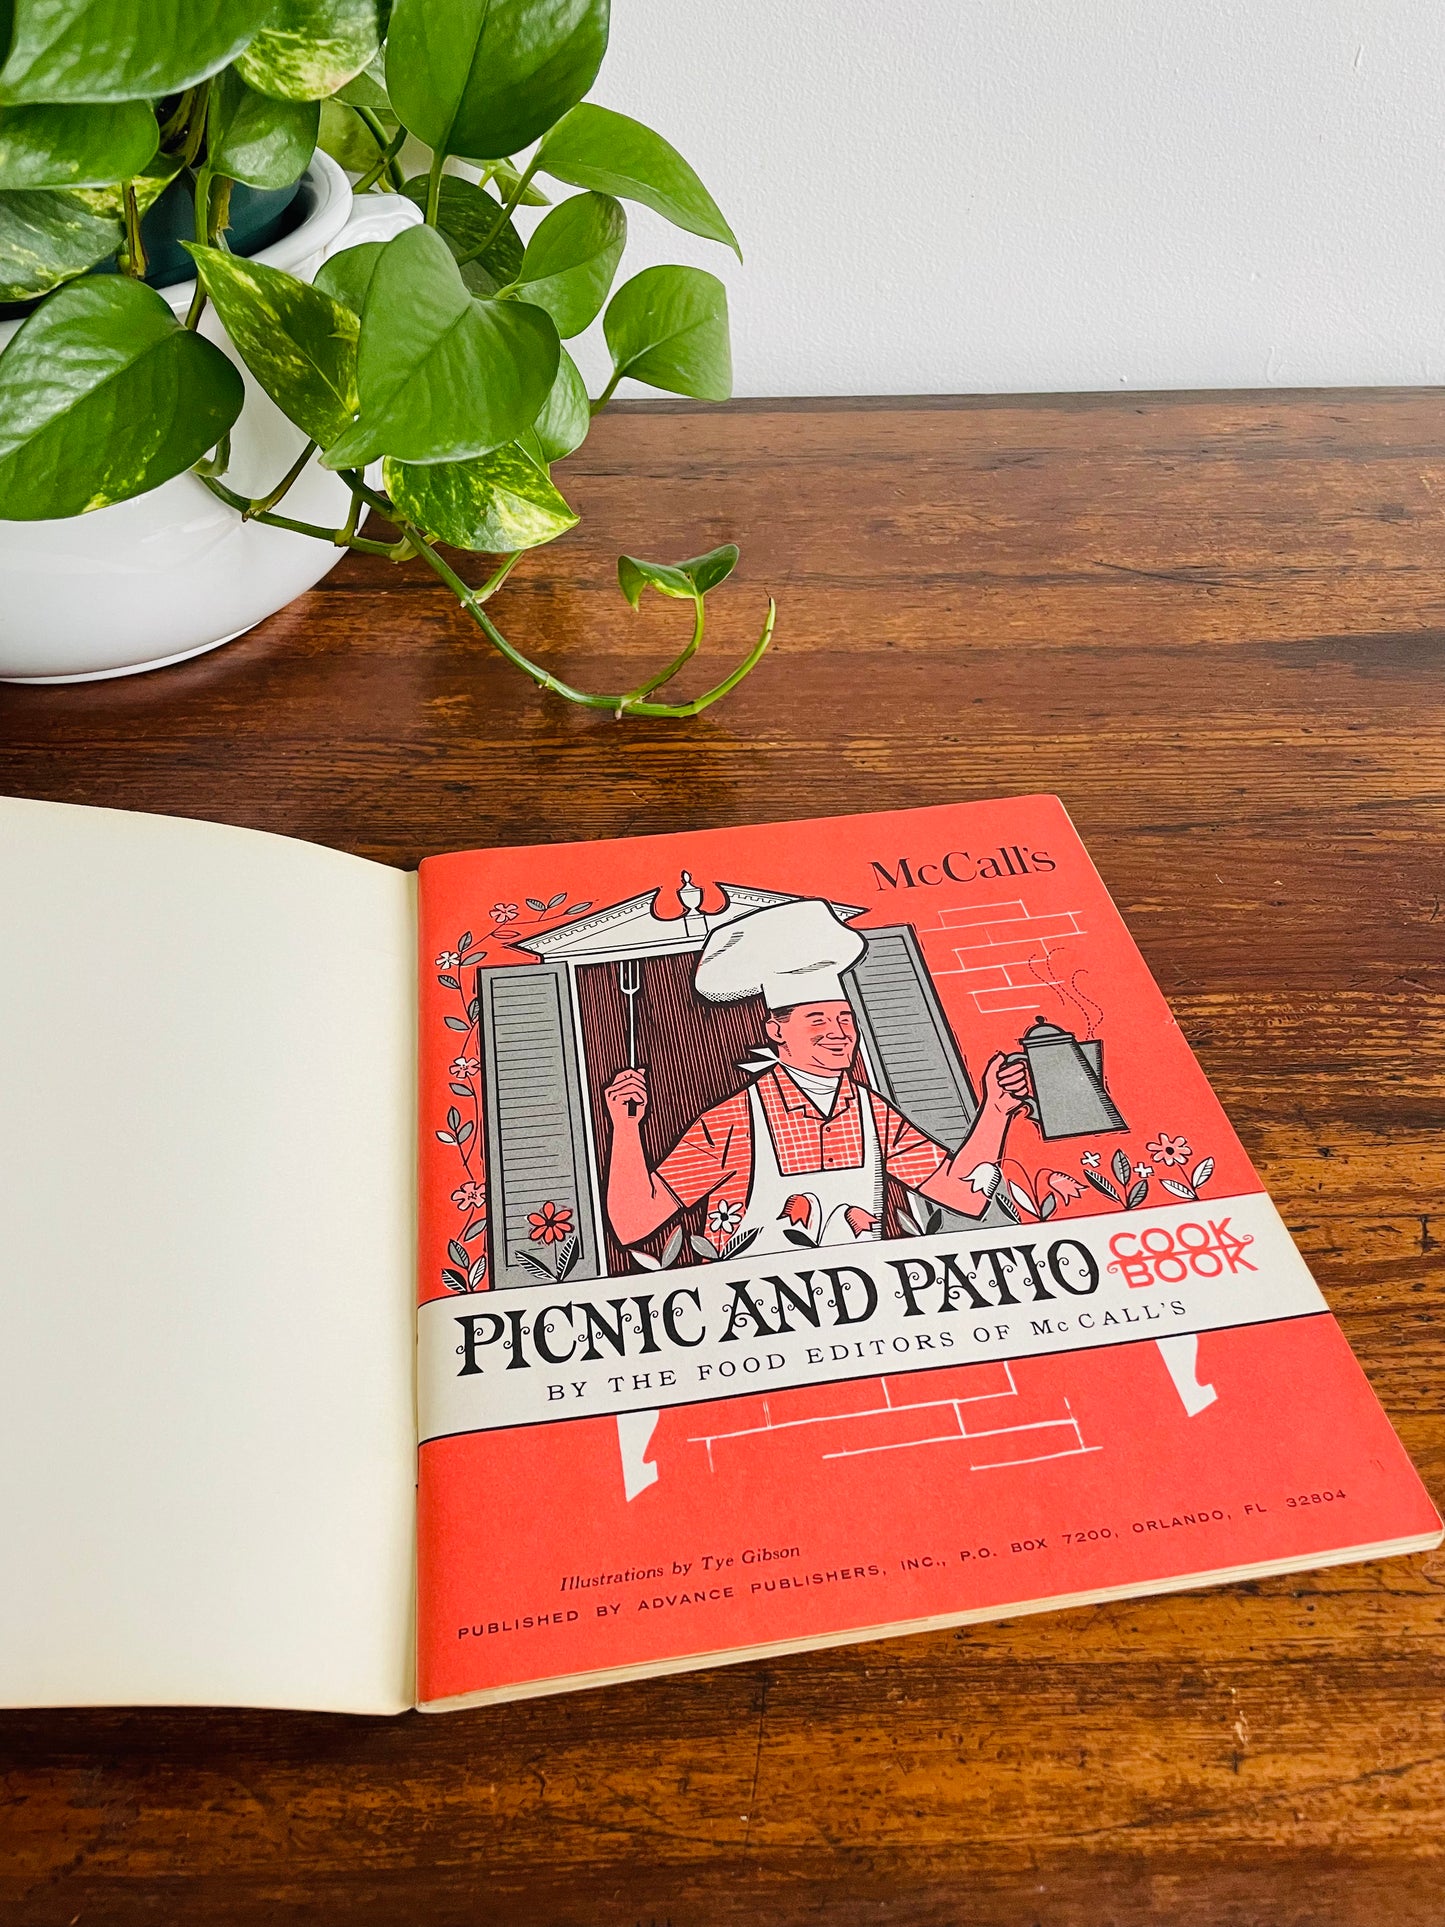 McCall's Picnic & Patio Cookbook (1972) - Campfire Cookery, BBQ, Picnic, Outdoor Beverages